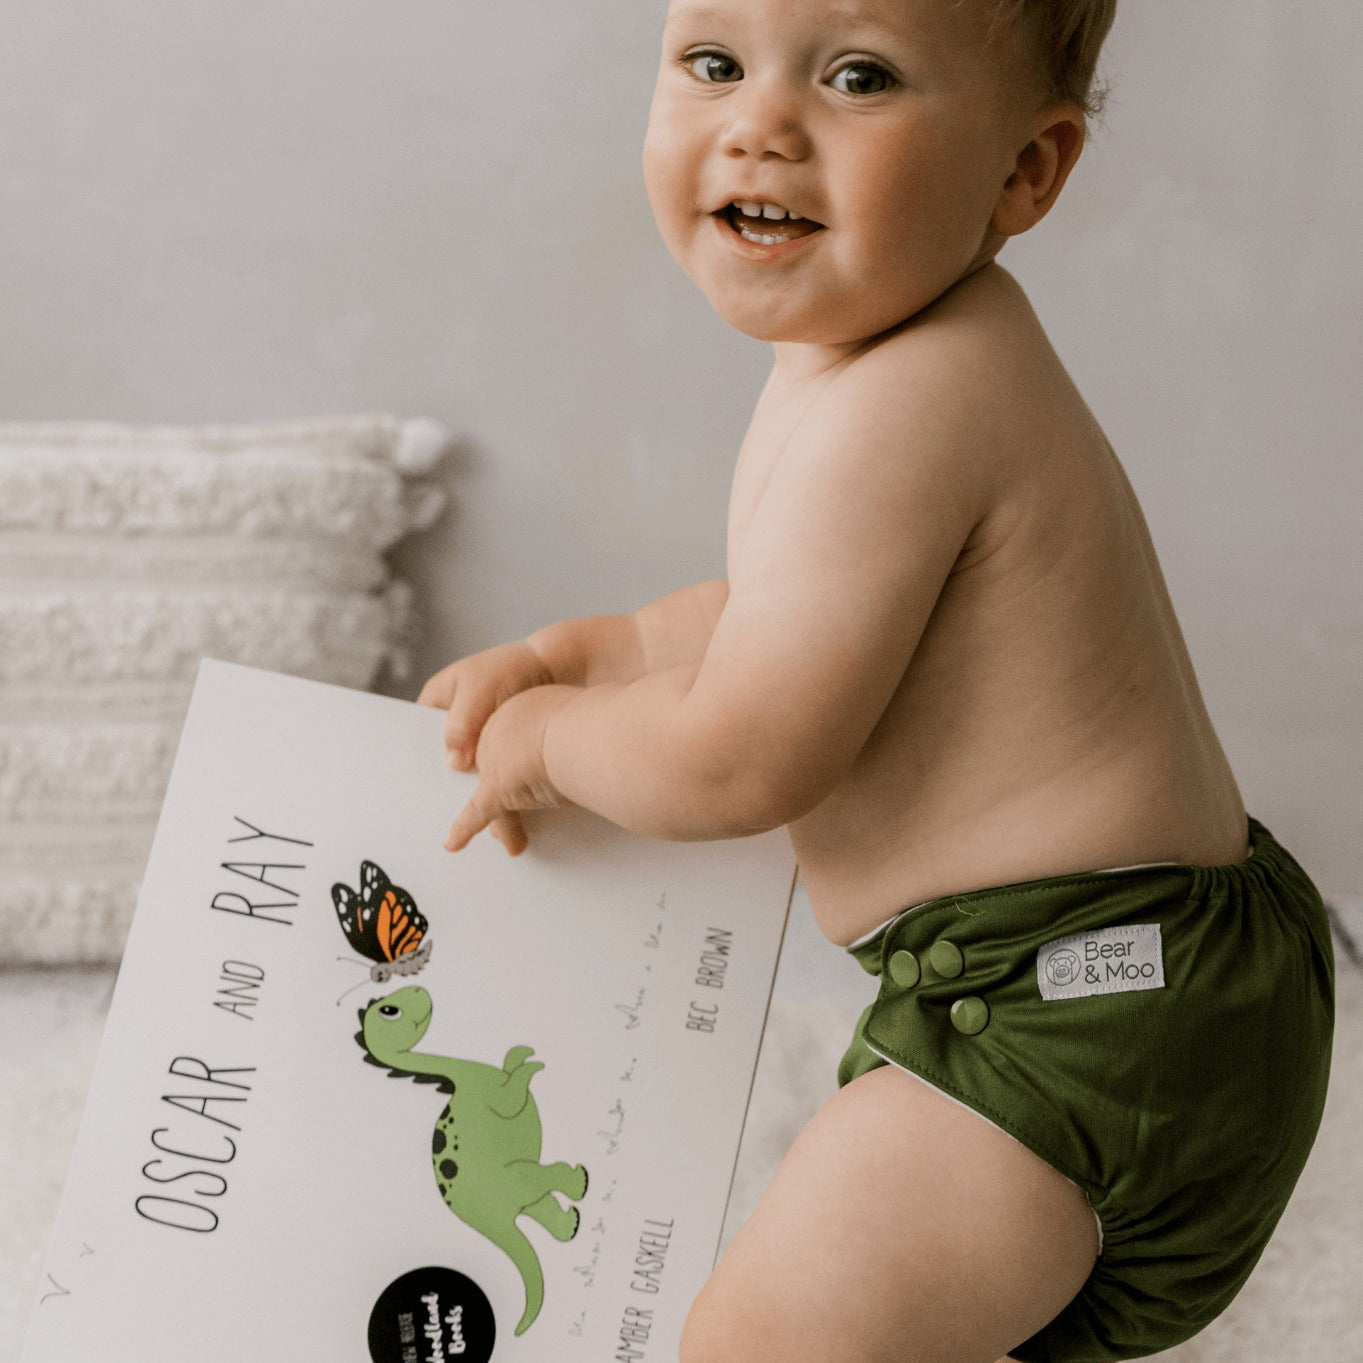 One Size Fits Most Reusable Cloth Nappy in Olive by Bear and Moo